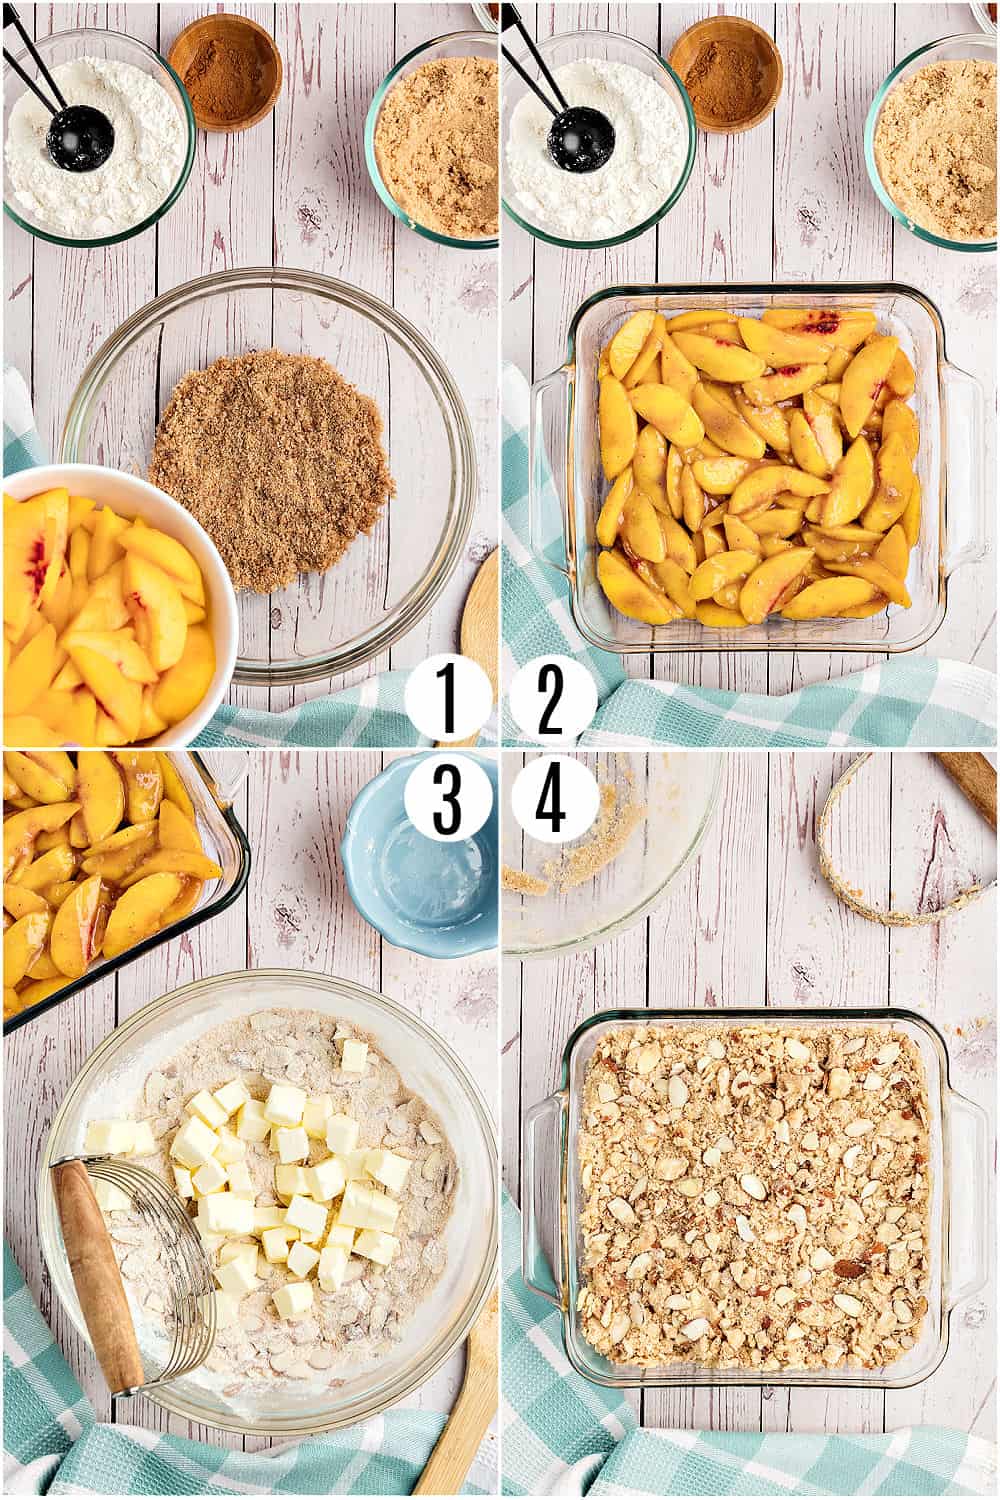 Step by step photos showing how to make peach crisp.